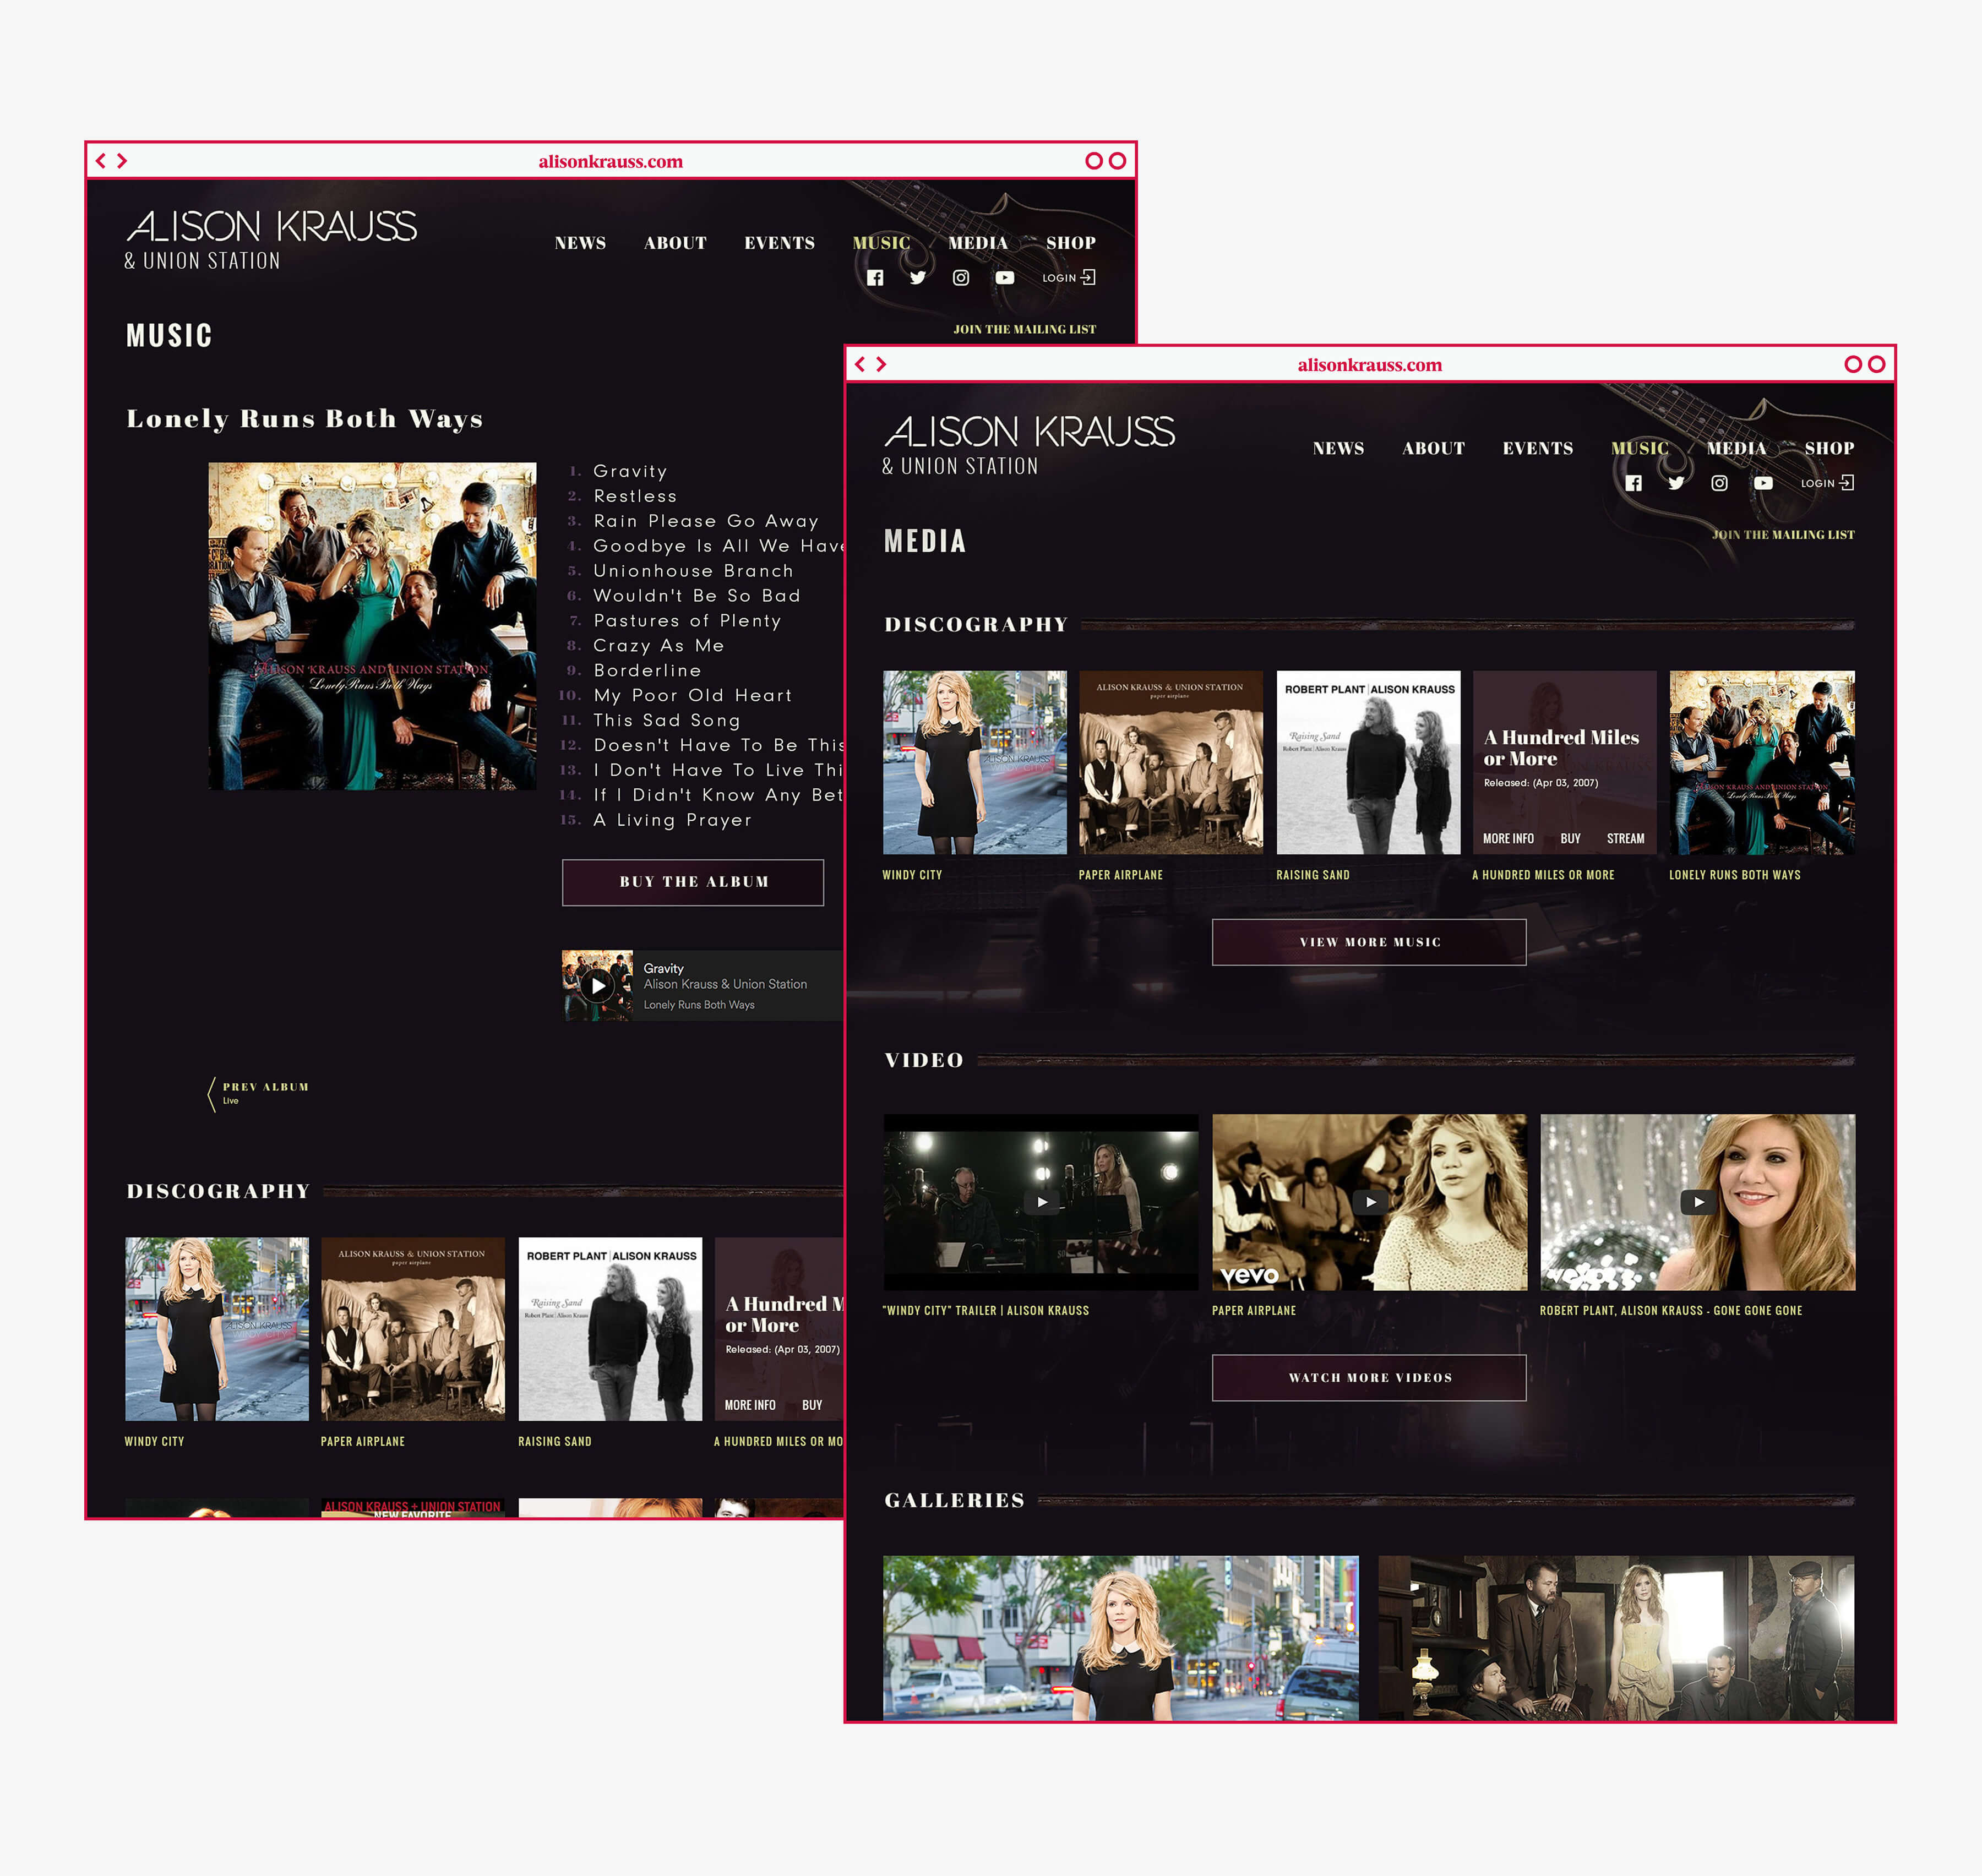 Images of the Media Section of the Alison Krauss Site.